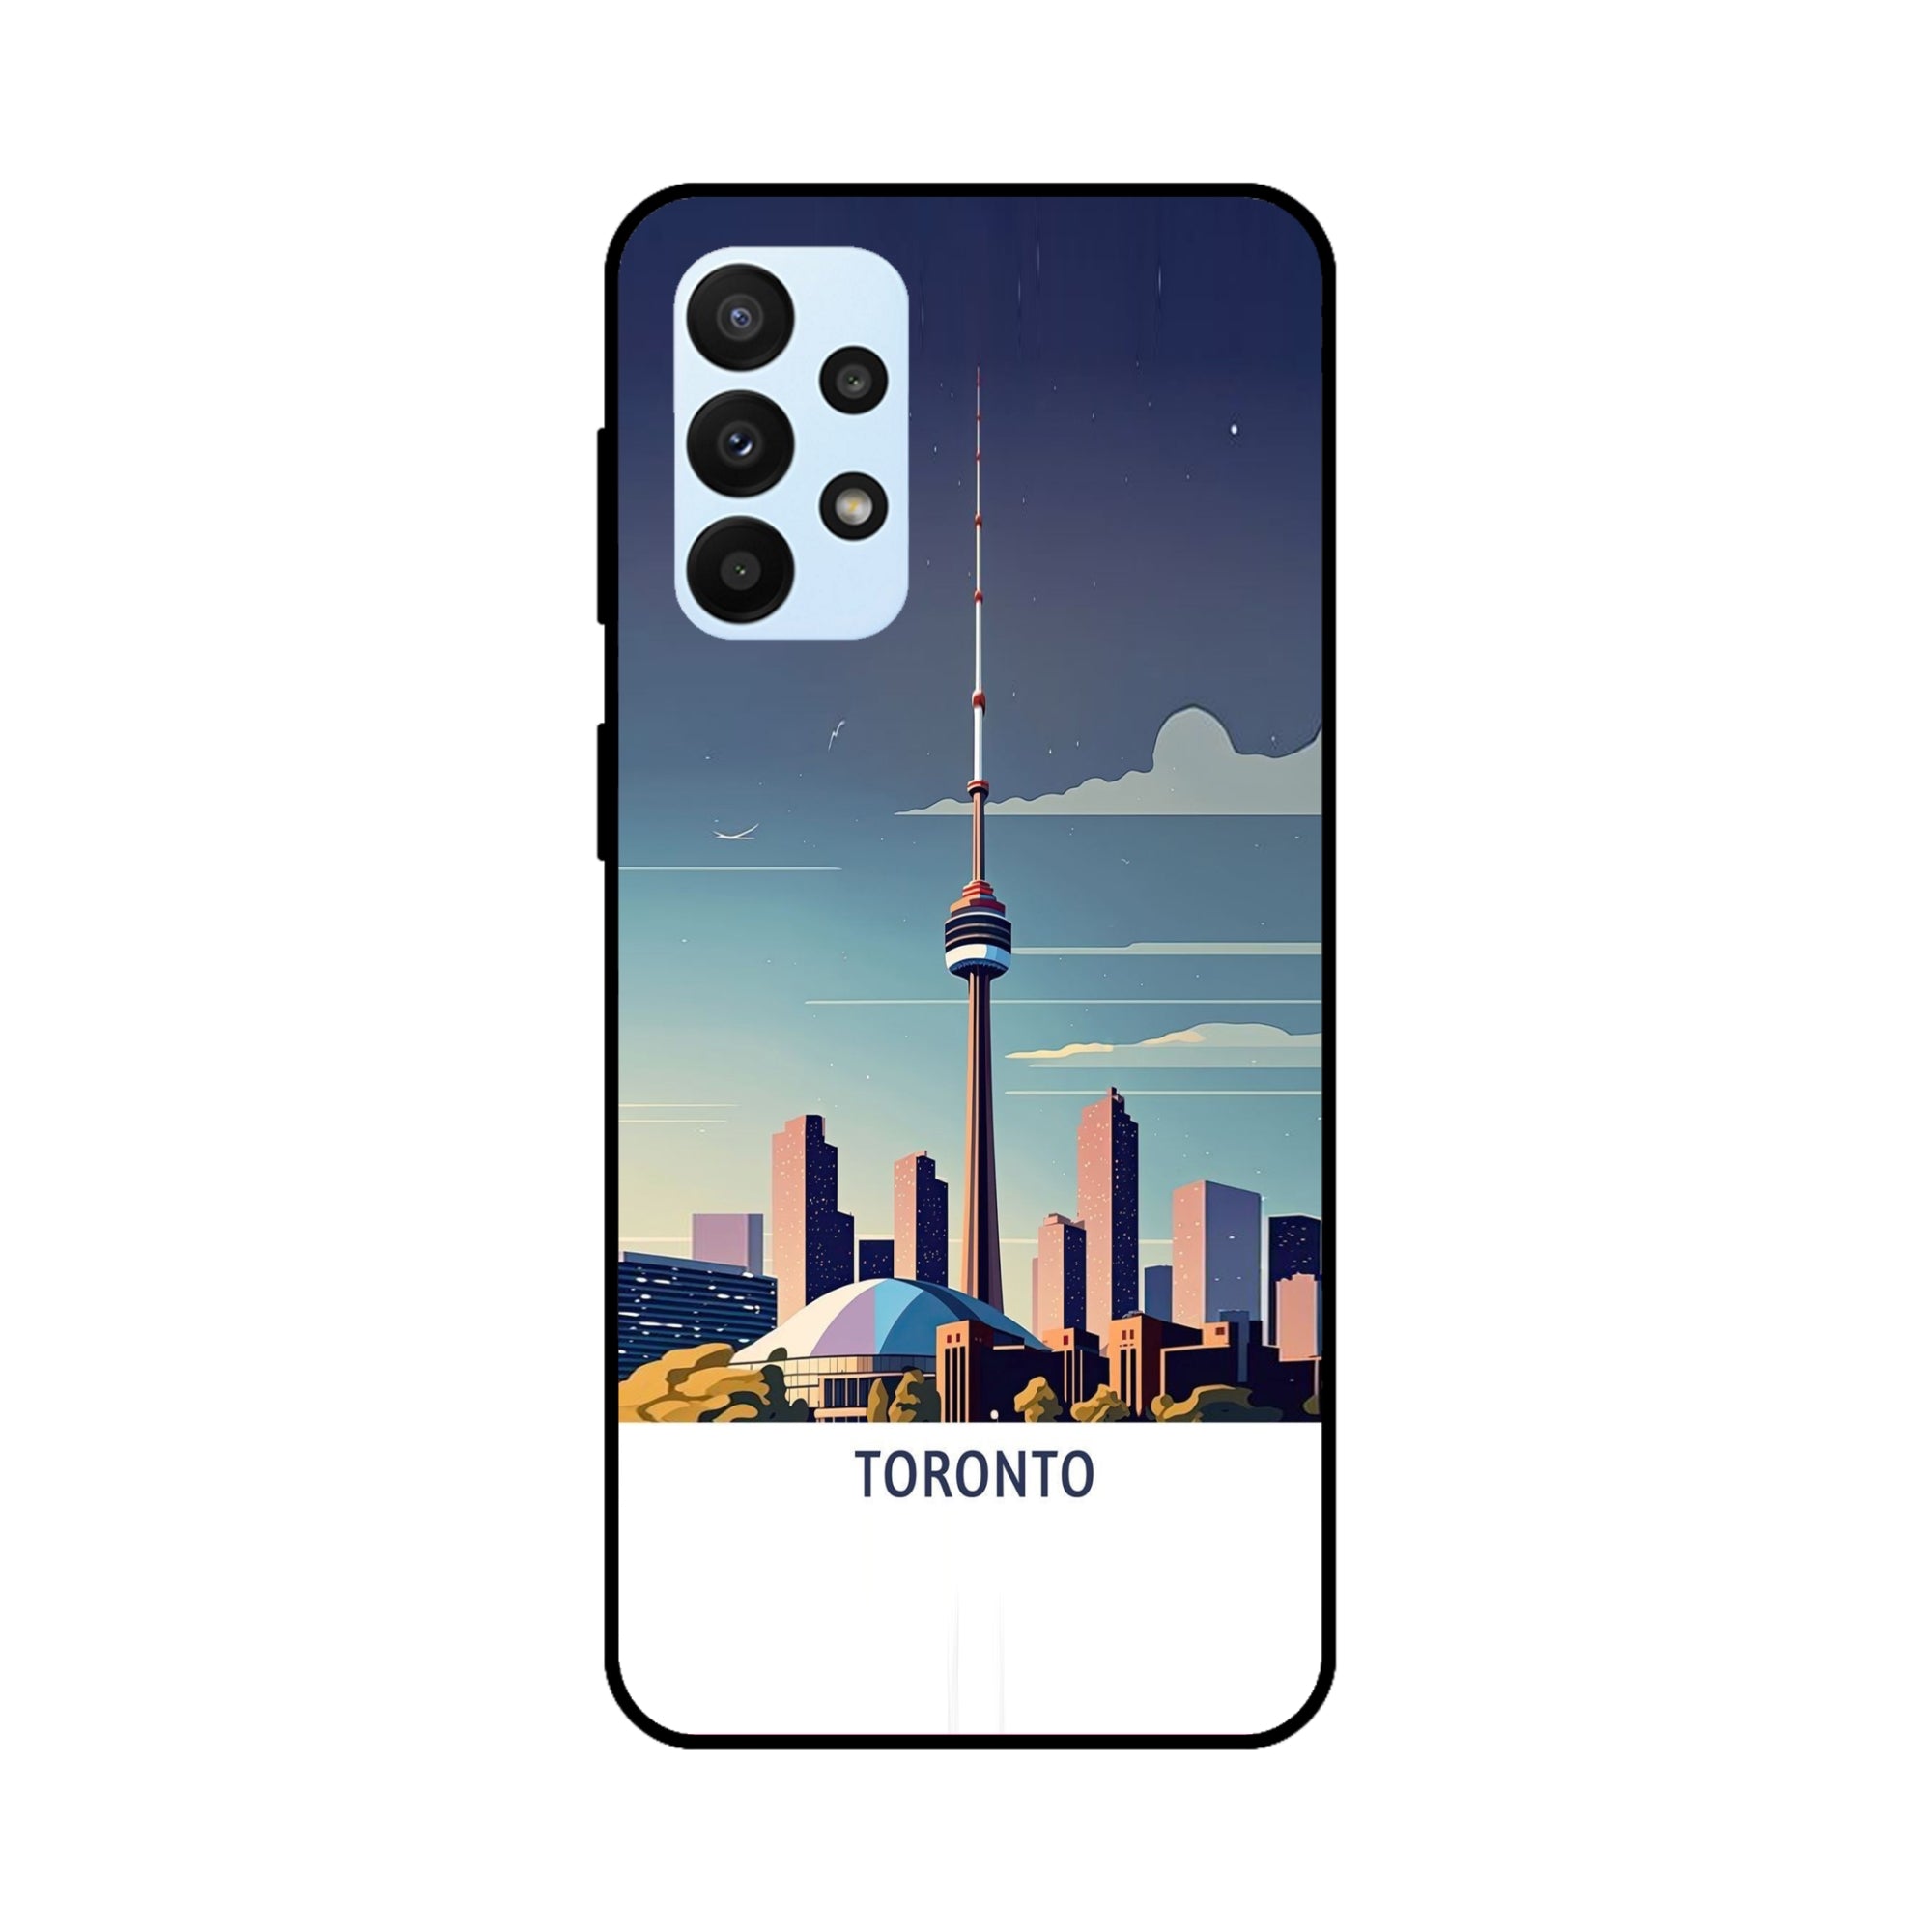 Buy Toronto Metal-Silicon Back Mobile Phone Case/Cover For Samsung Galaxy A72 Online